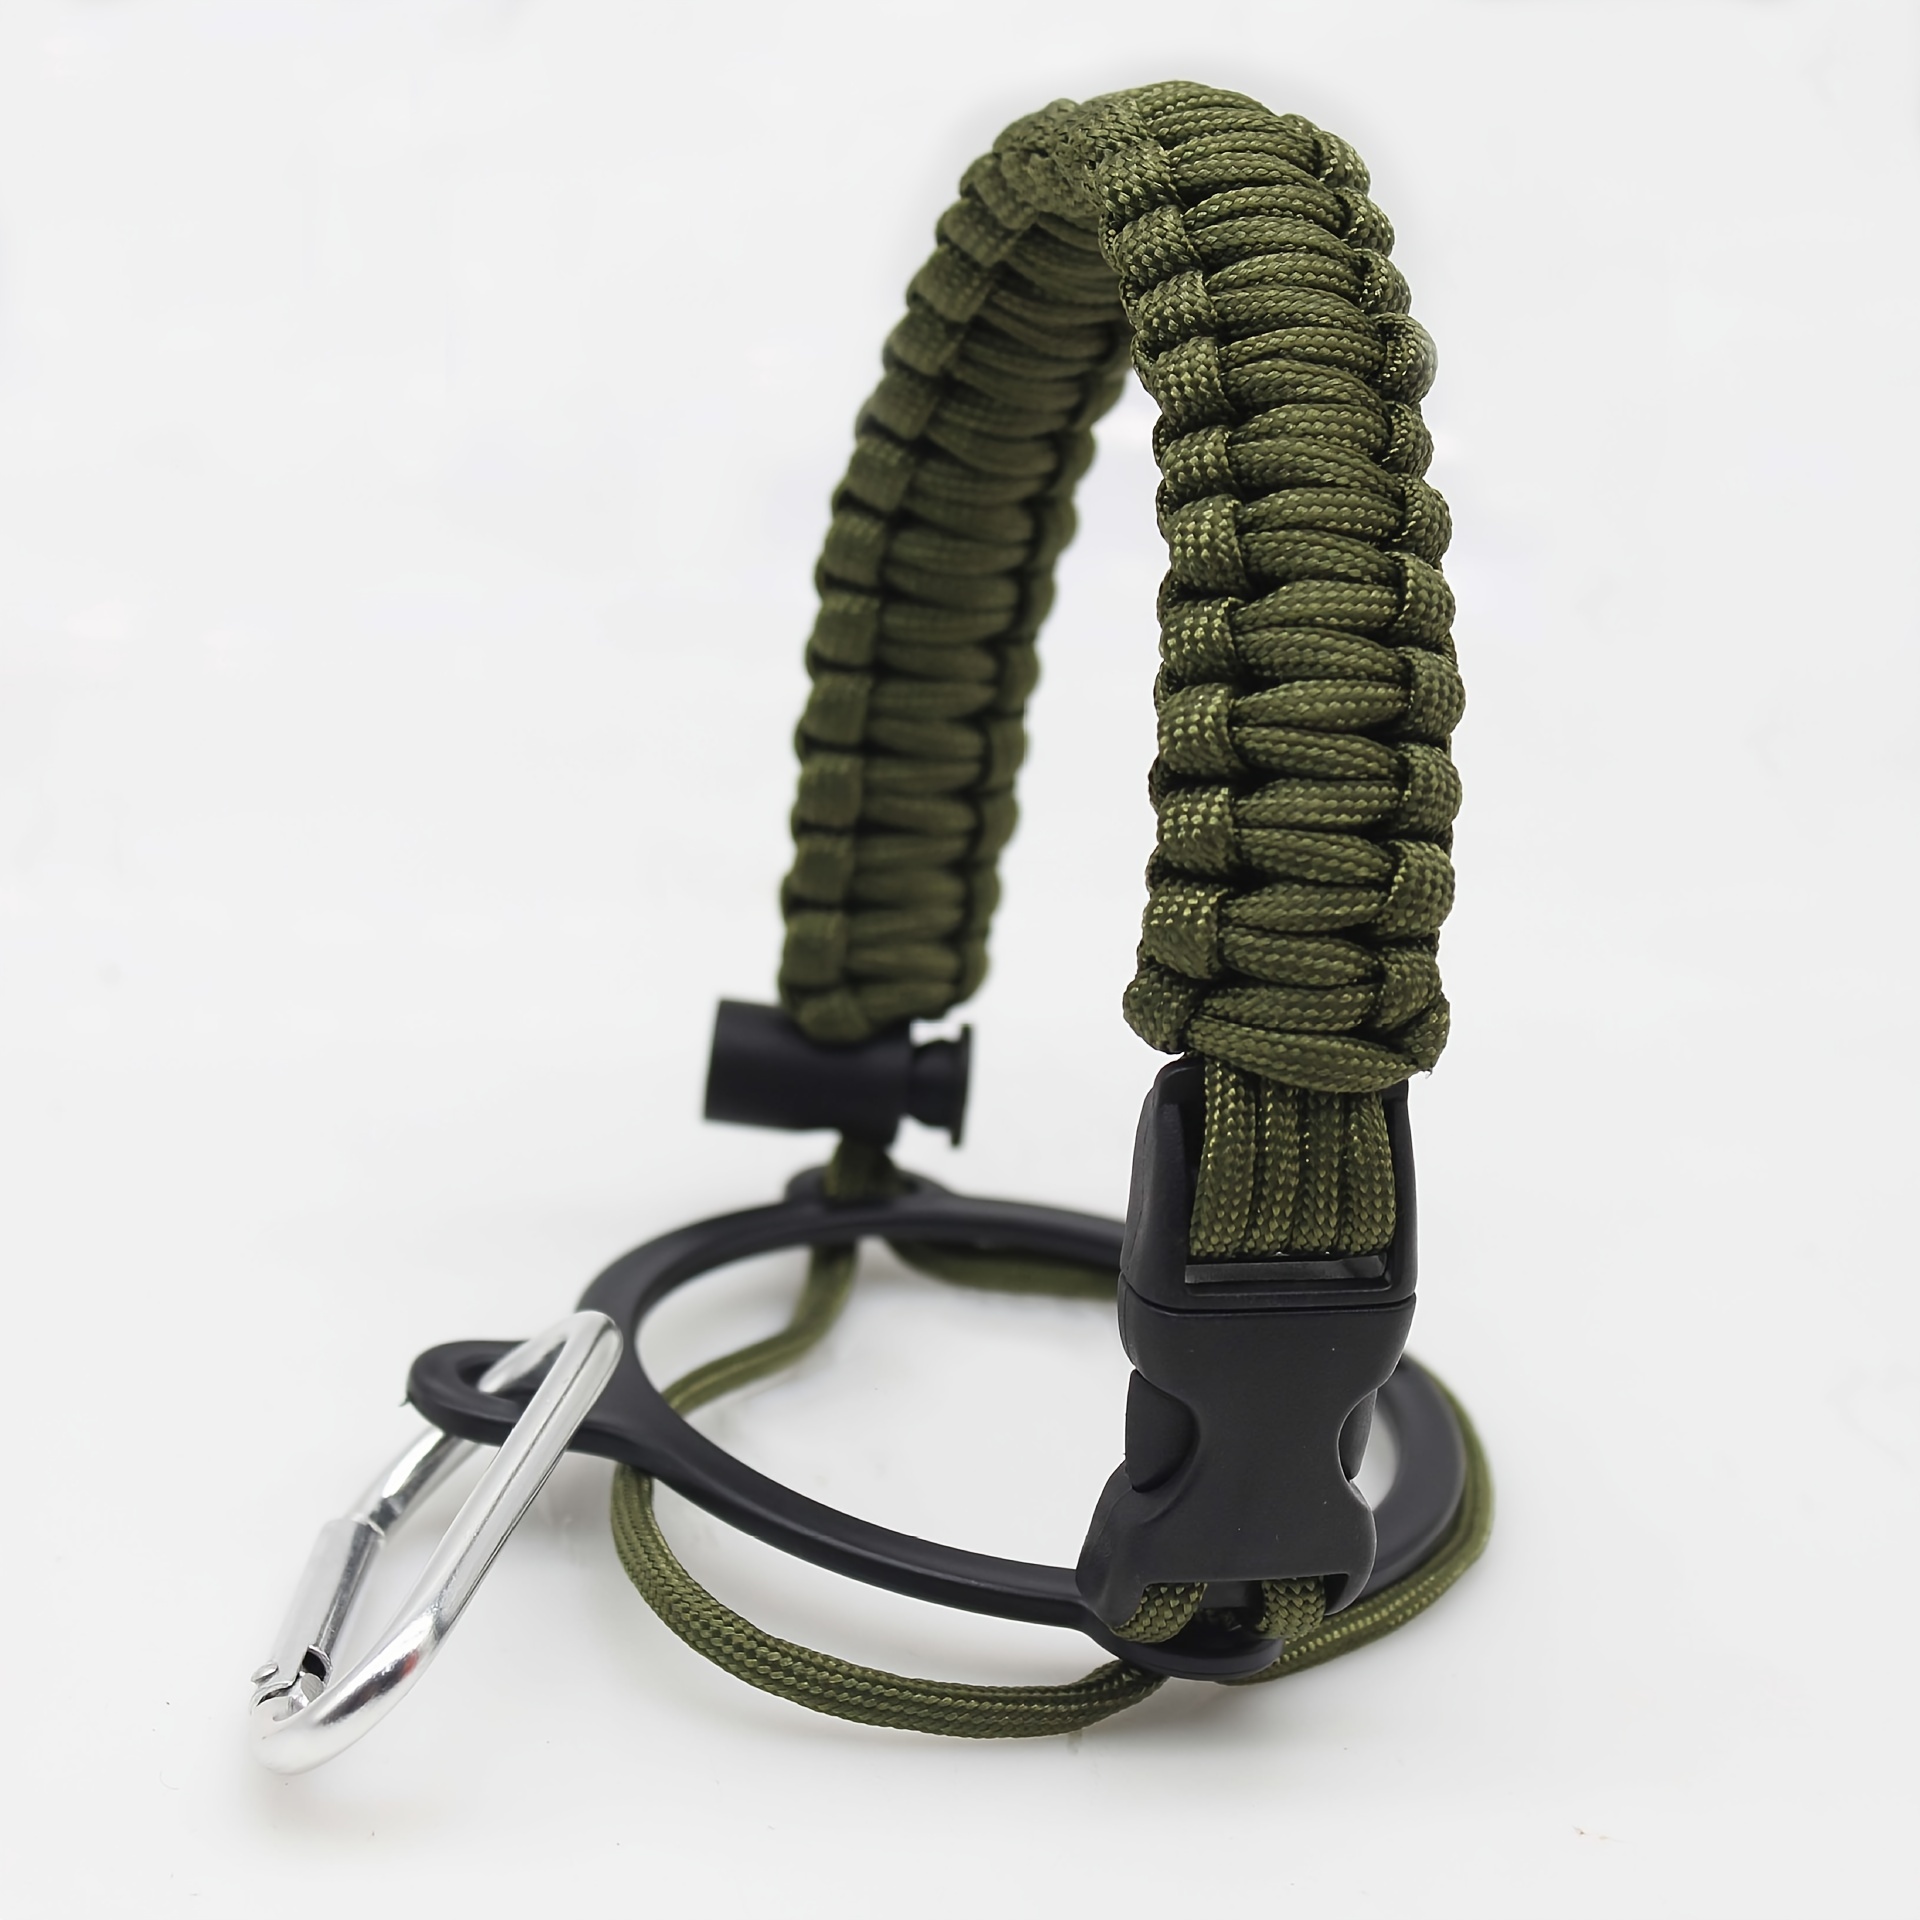 Compact adjustable bottle carry made from 2mm paracord that's small enough  to keep on a keyring. Included image of three step instructions, used a  double fisherman's knot, then heat shrink to keep